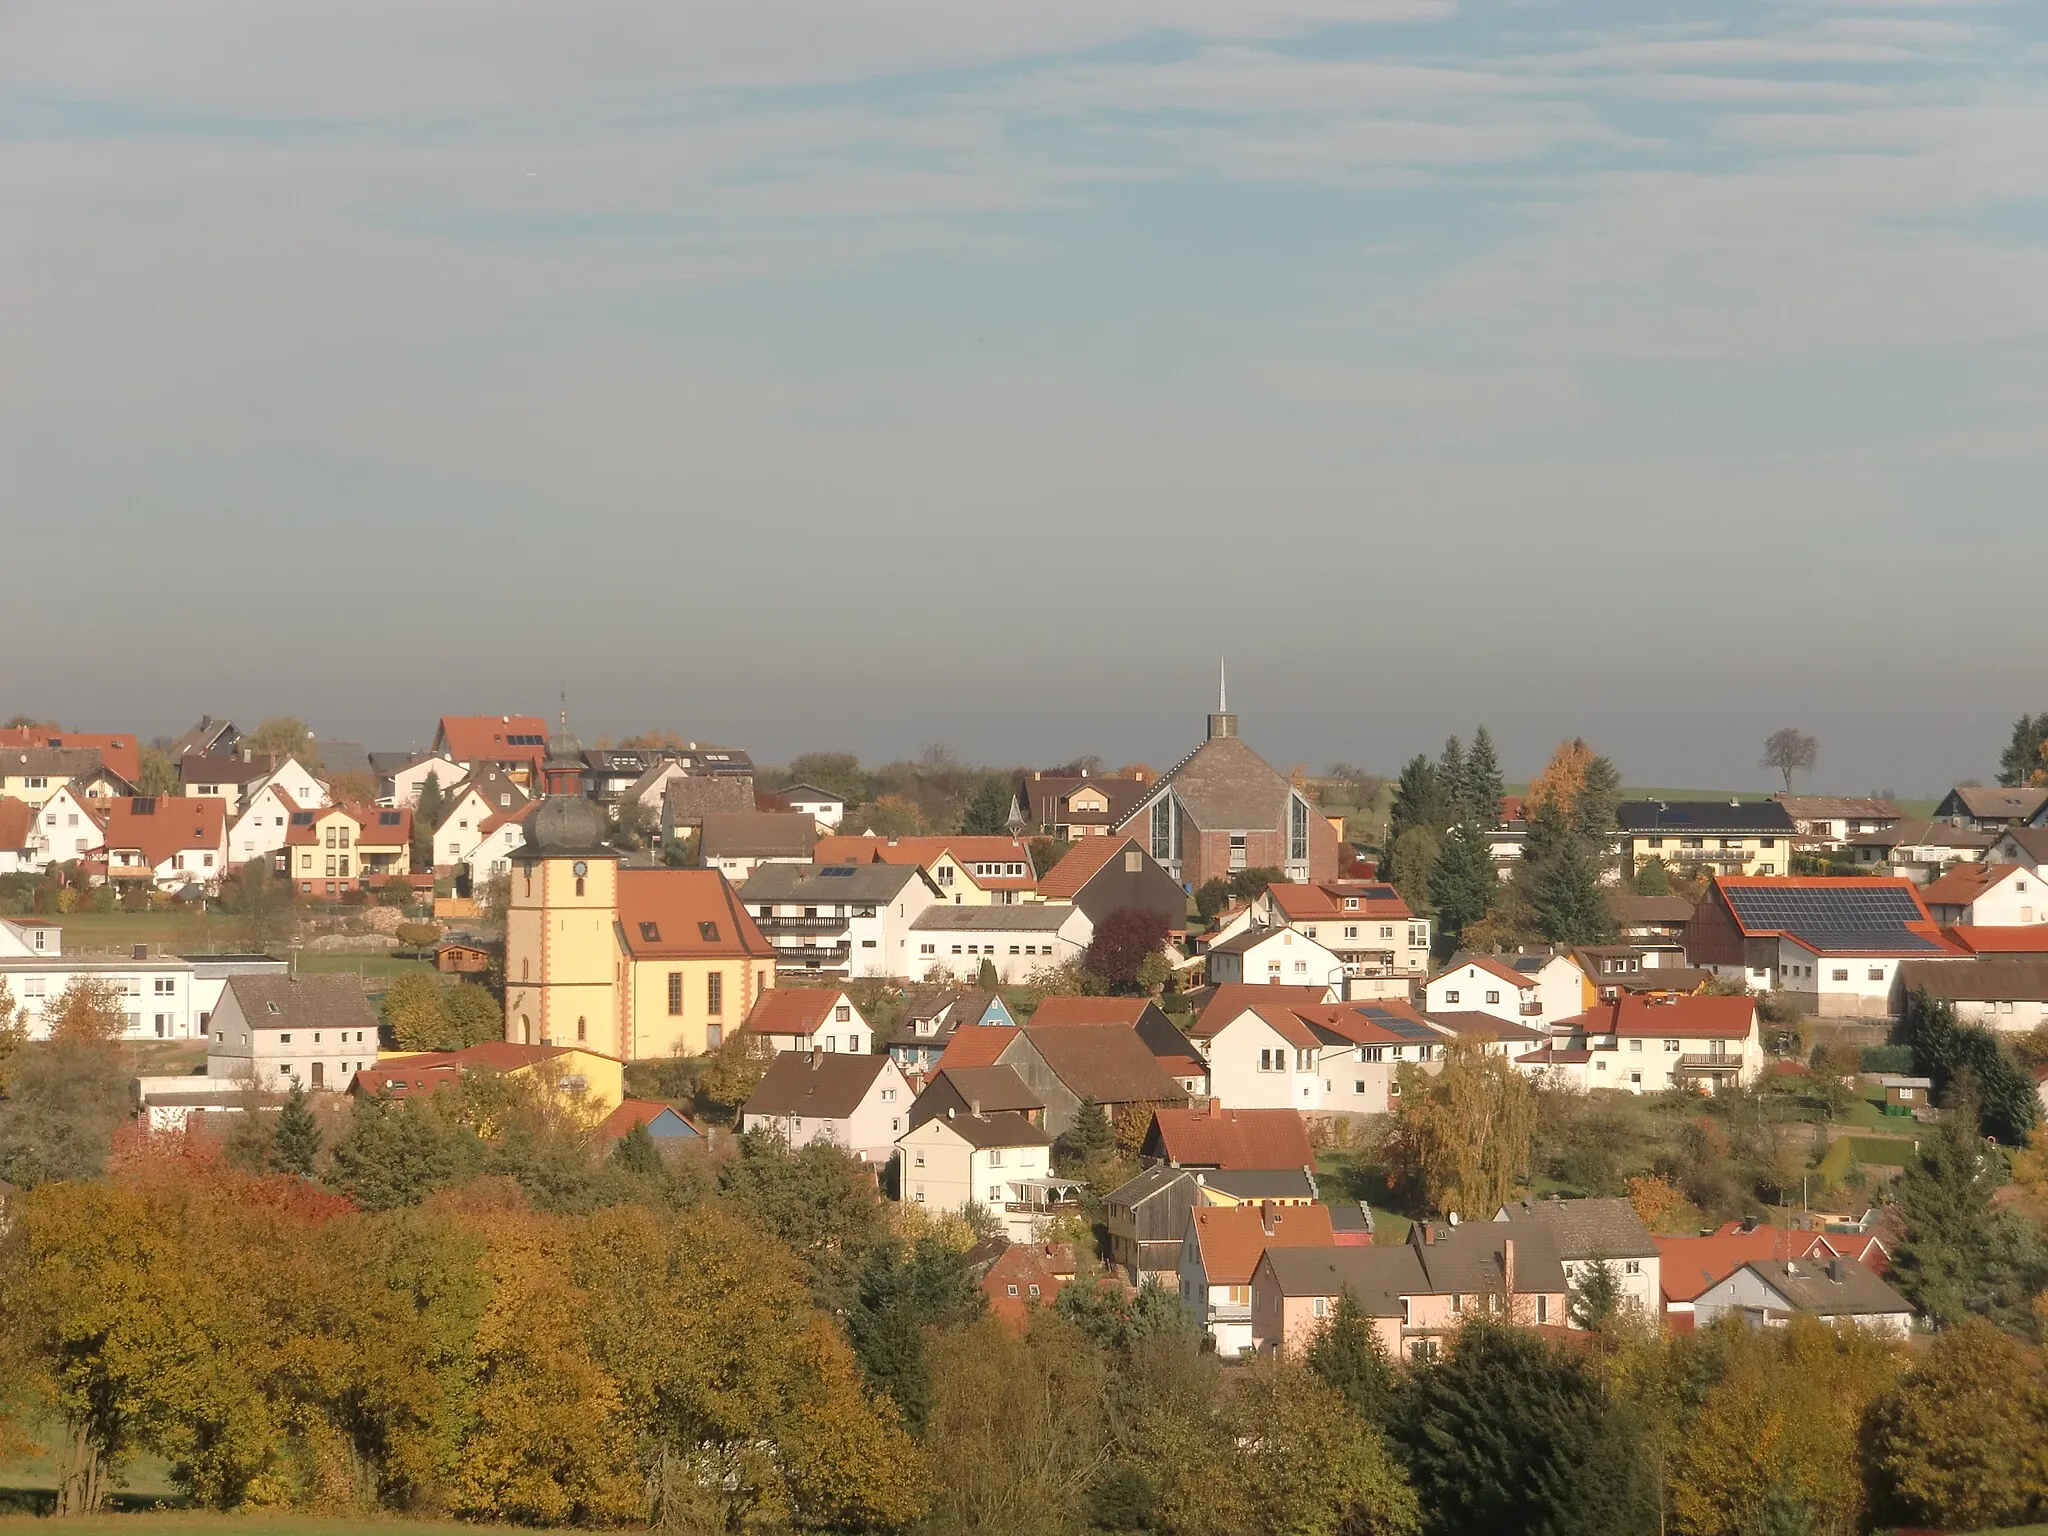 Photo showing: The village of Vielbrunn, Hesse, Germany